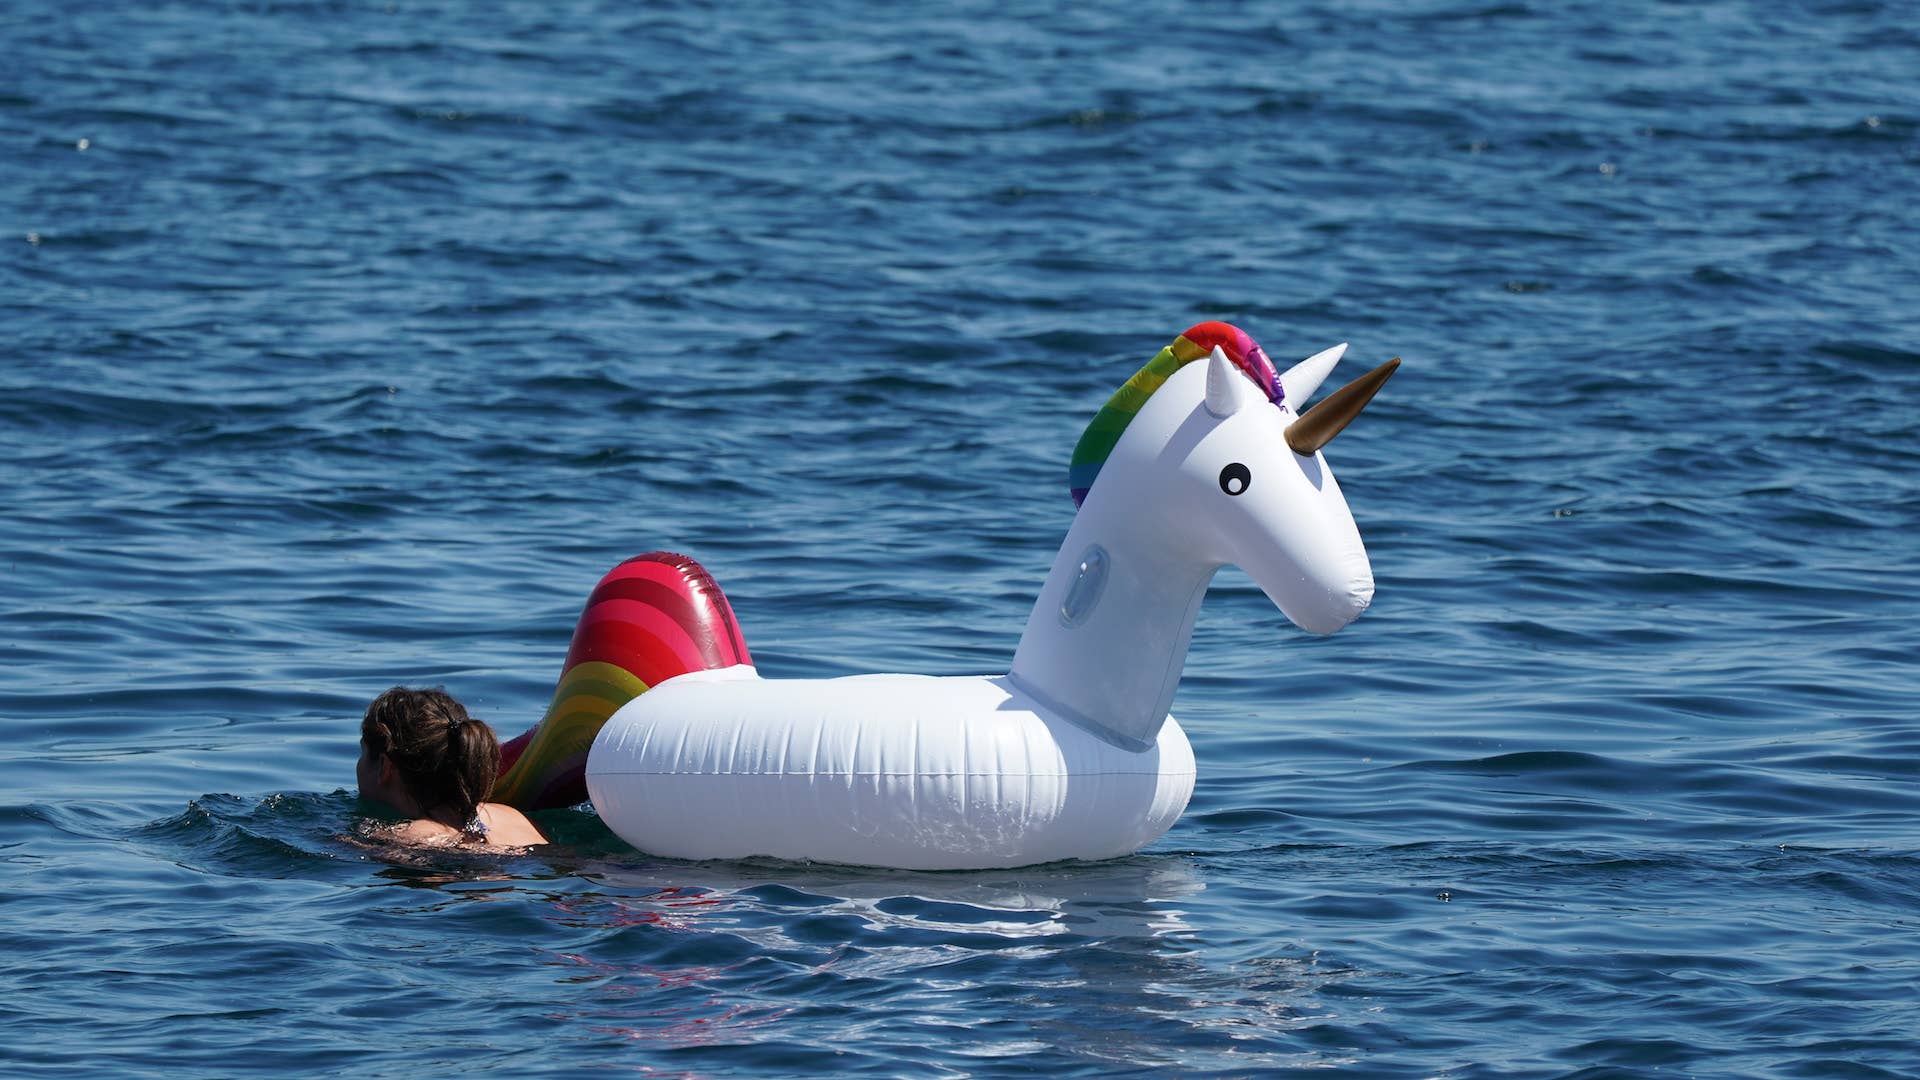 A female swimmer and an inflatable unicorn can be seen.